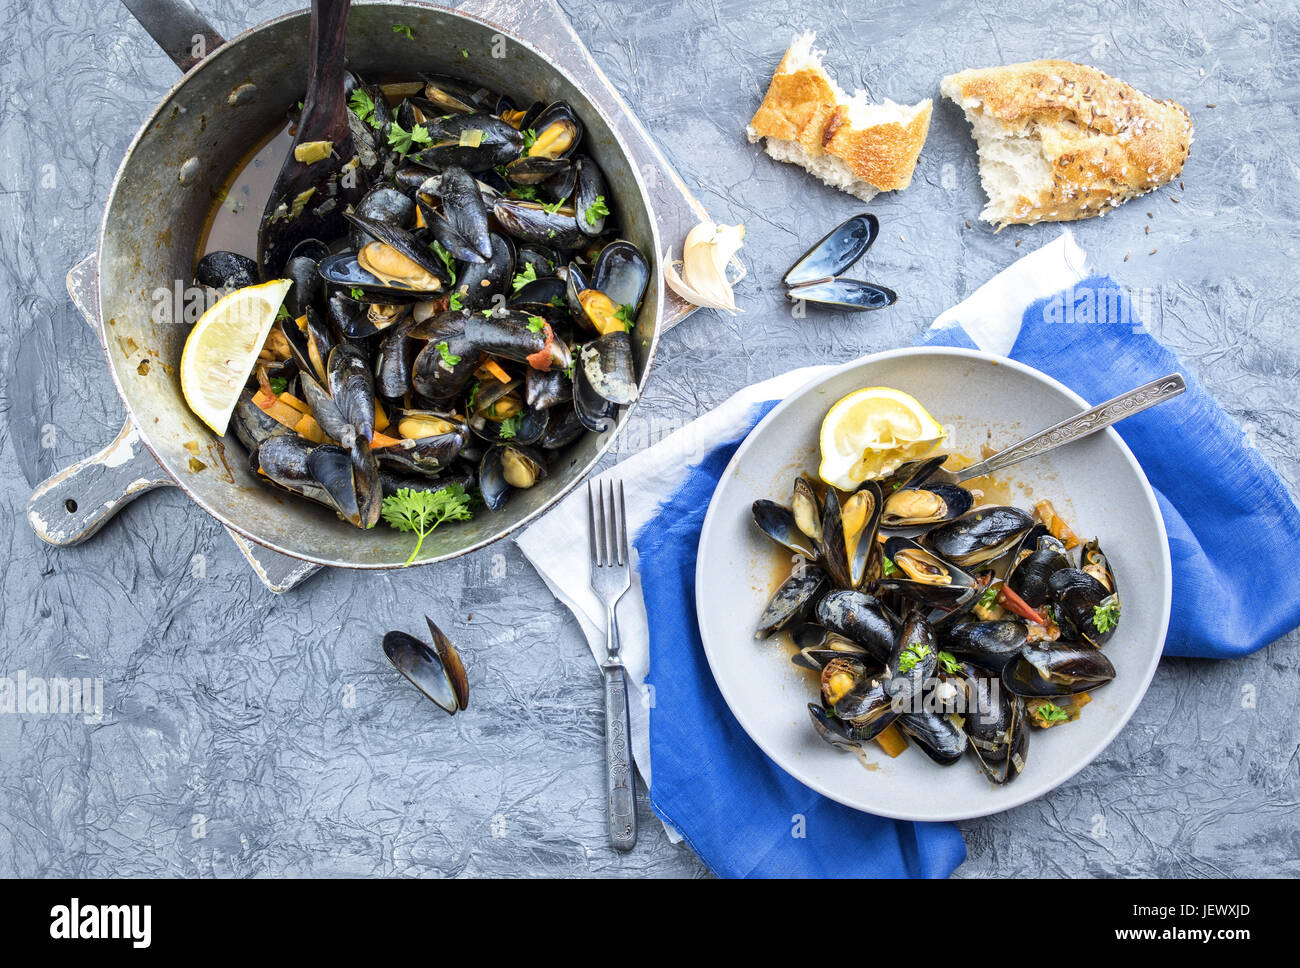 Sailors Mussel on Plate Stock Photo